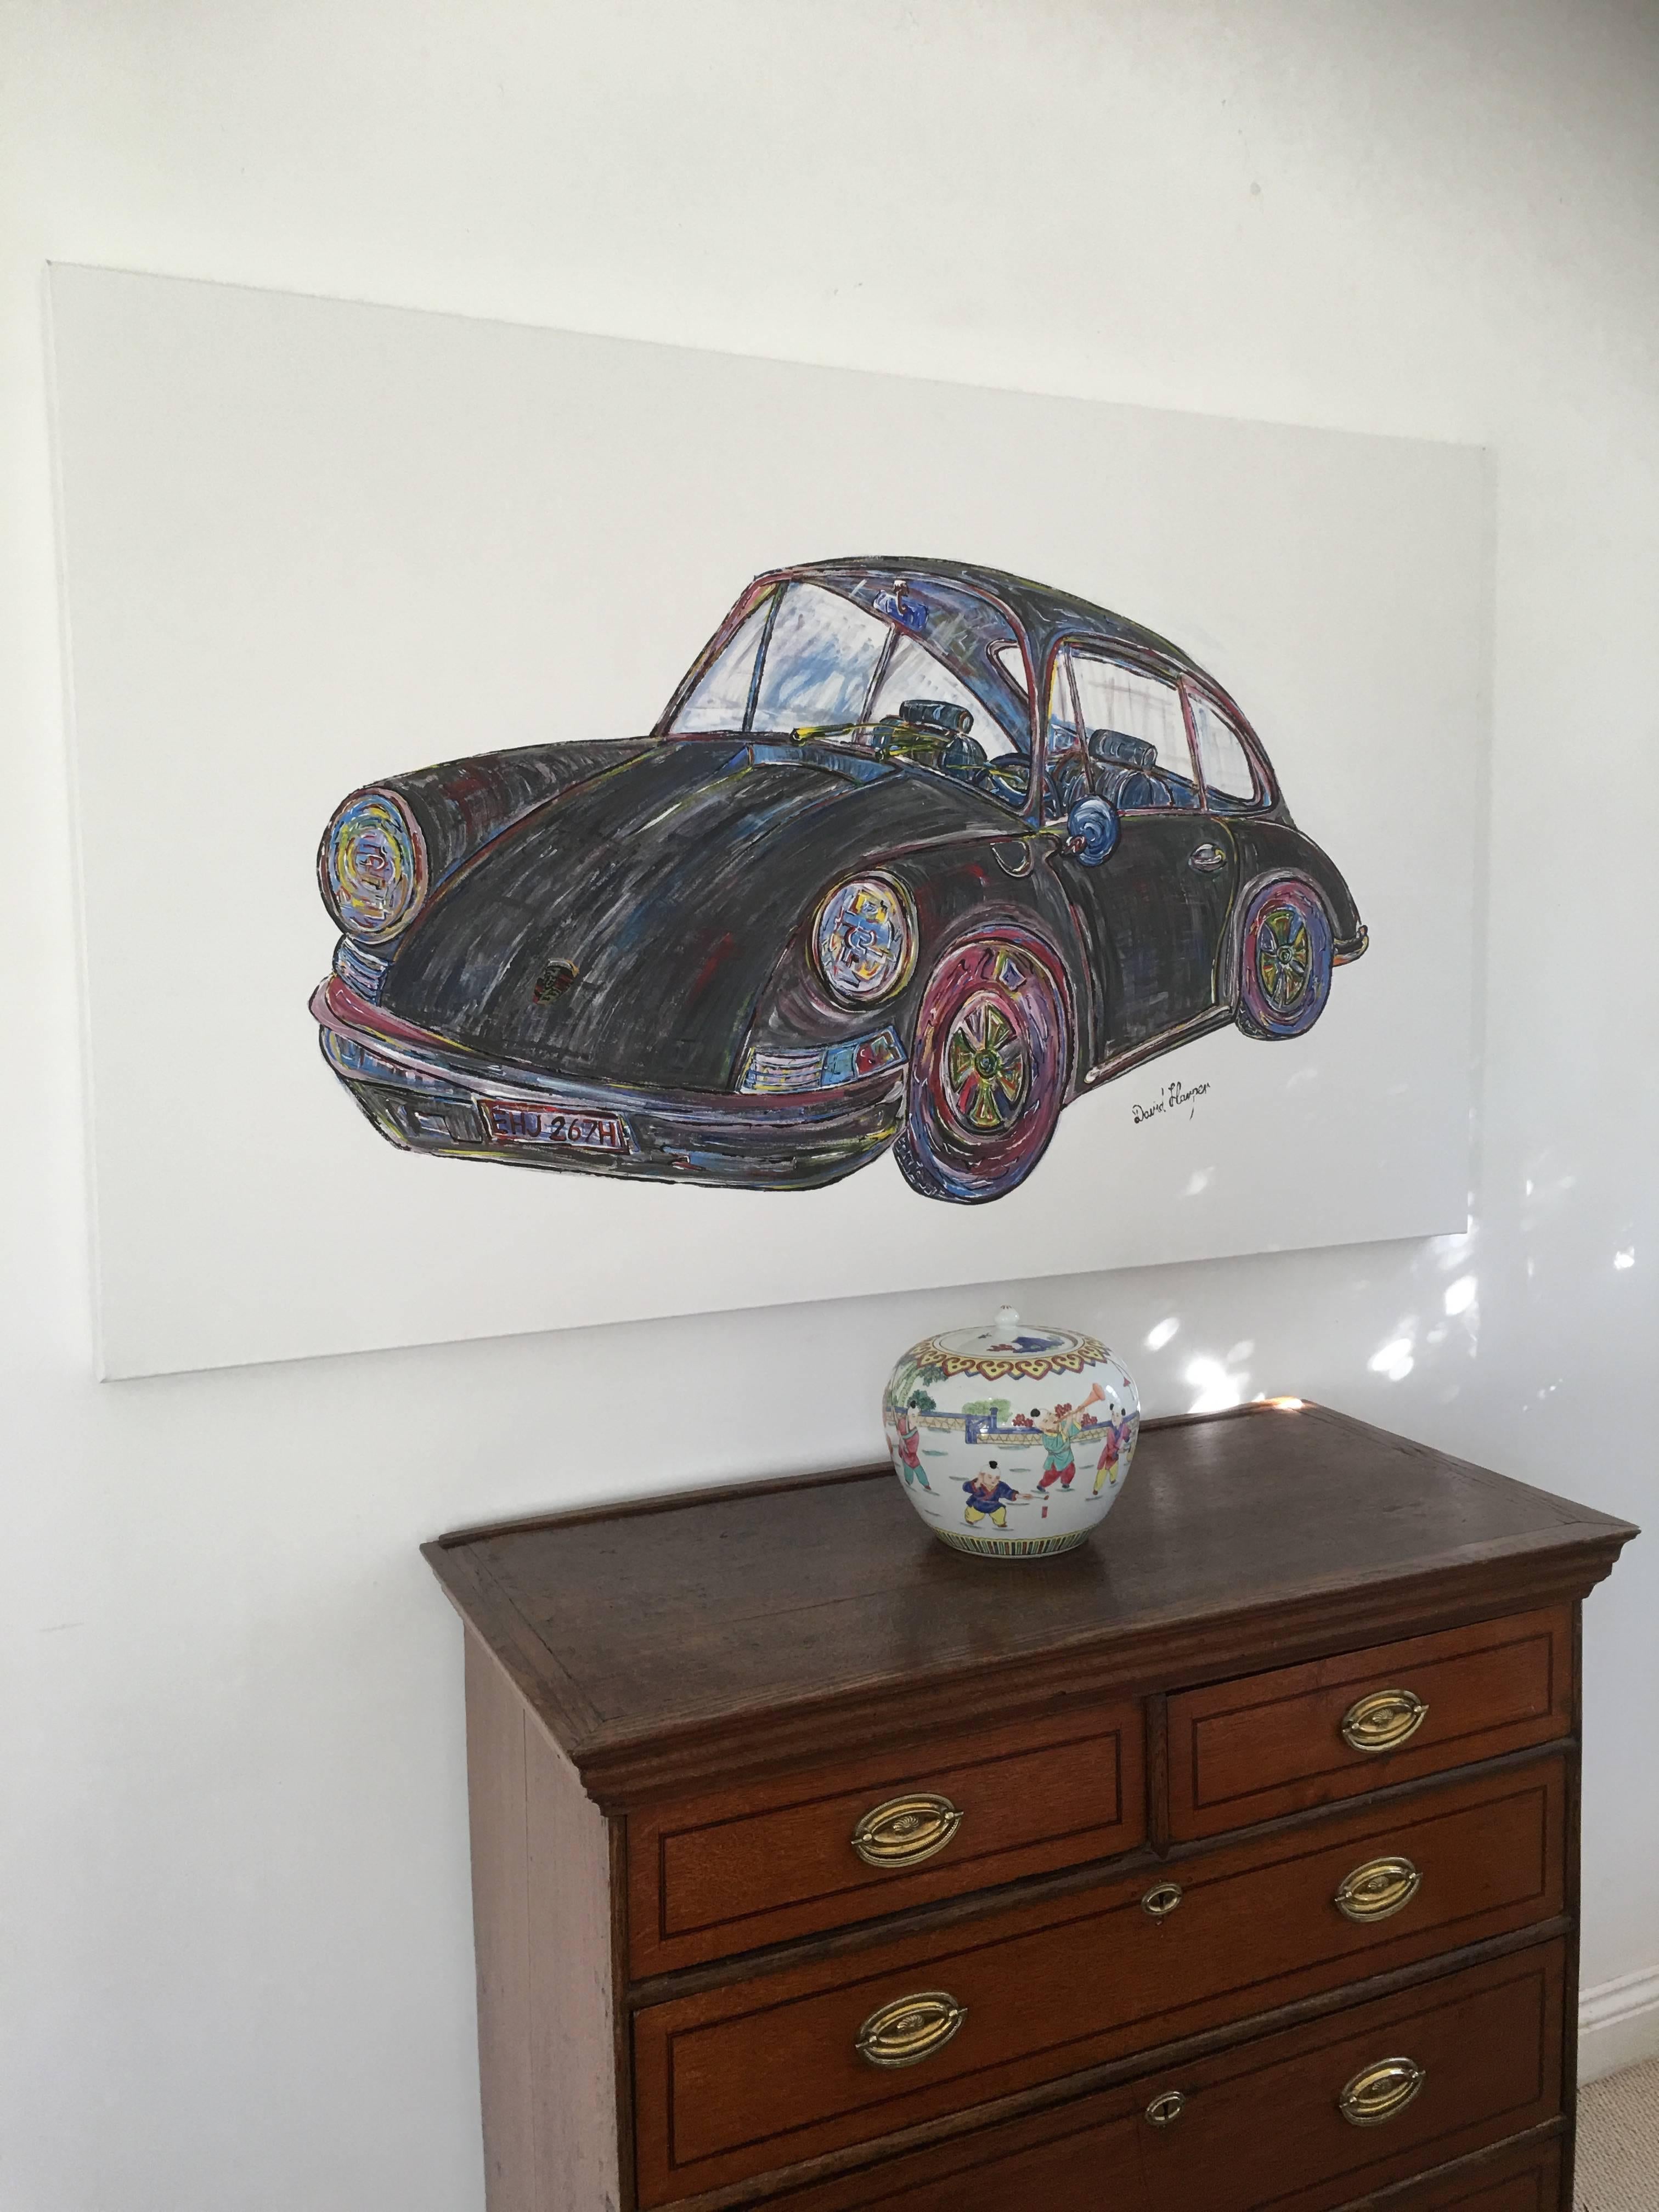 One of my classic car paintings 

My work is in a number of classic car museums and I'm regularly commission to paint for them and for private collectors

This Porsche belongs to Great Escapes Classic Car Hire in England, who, after I drove the